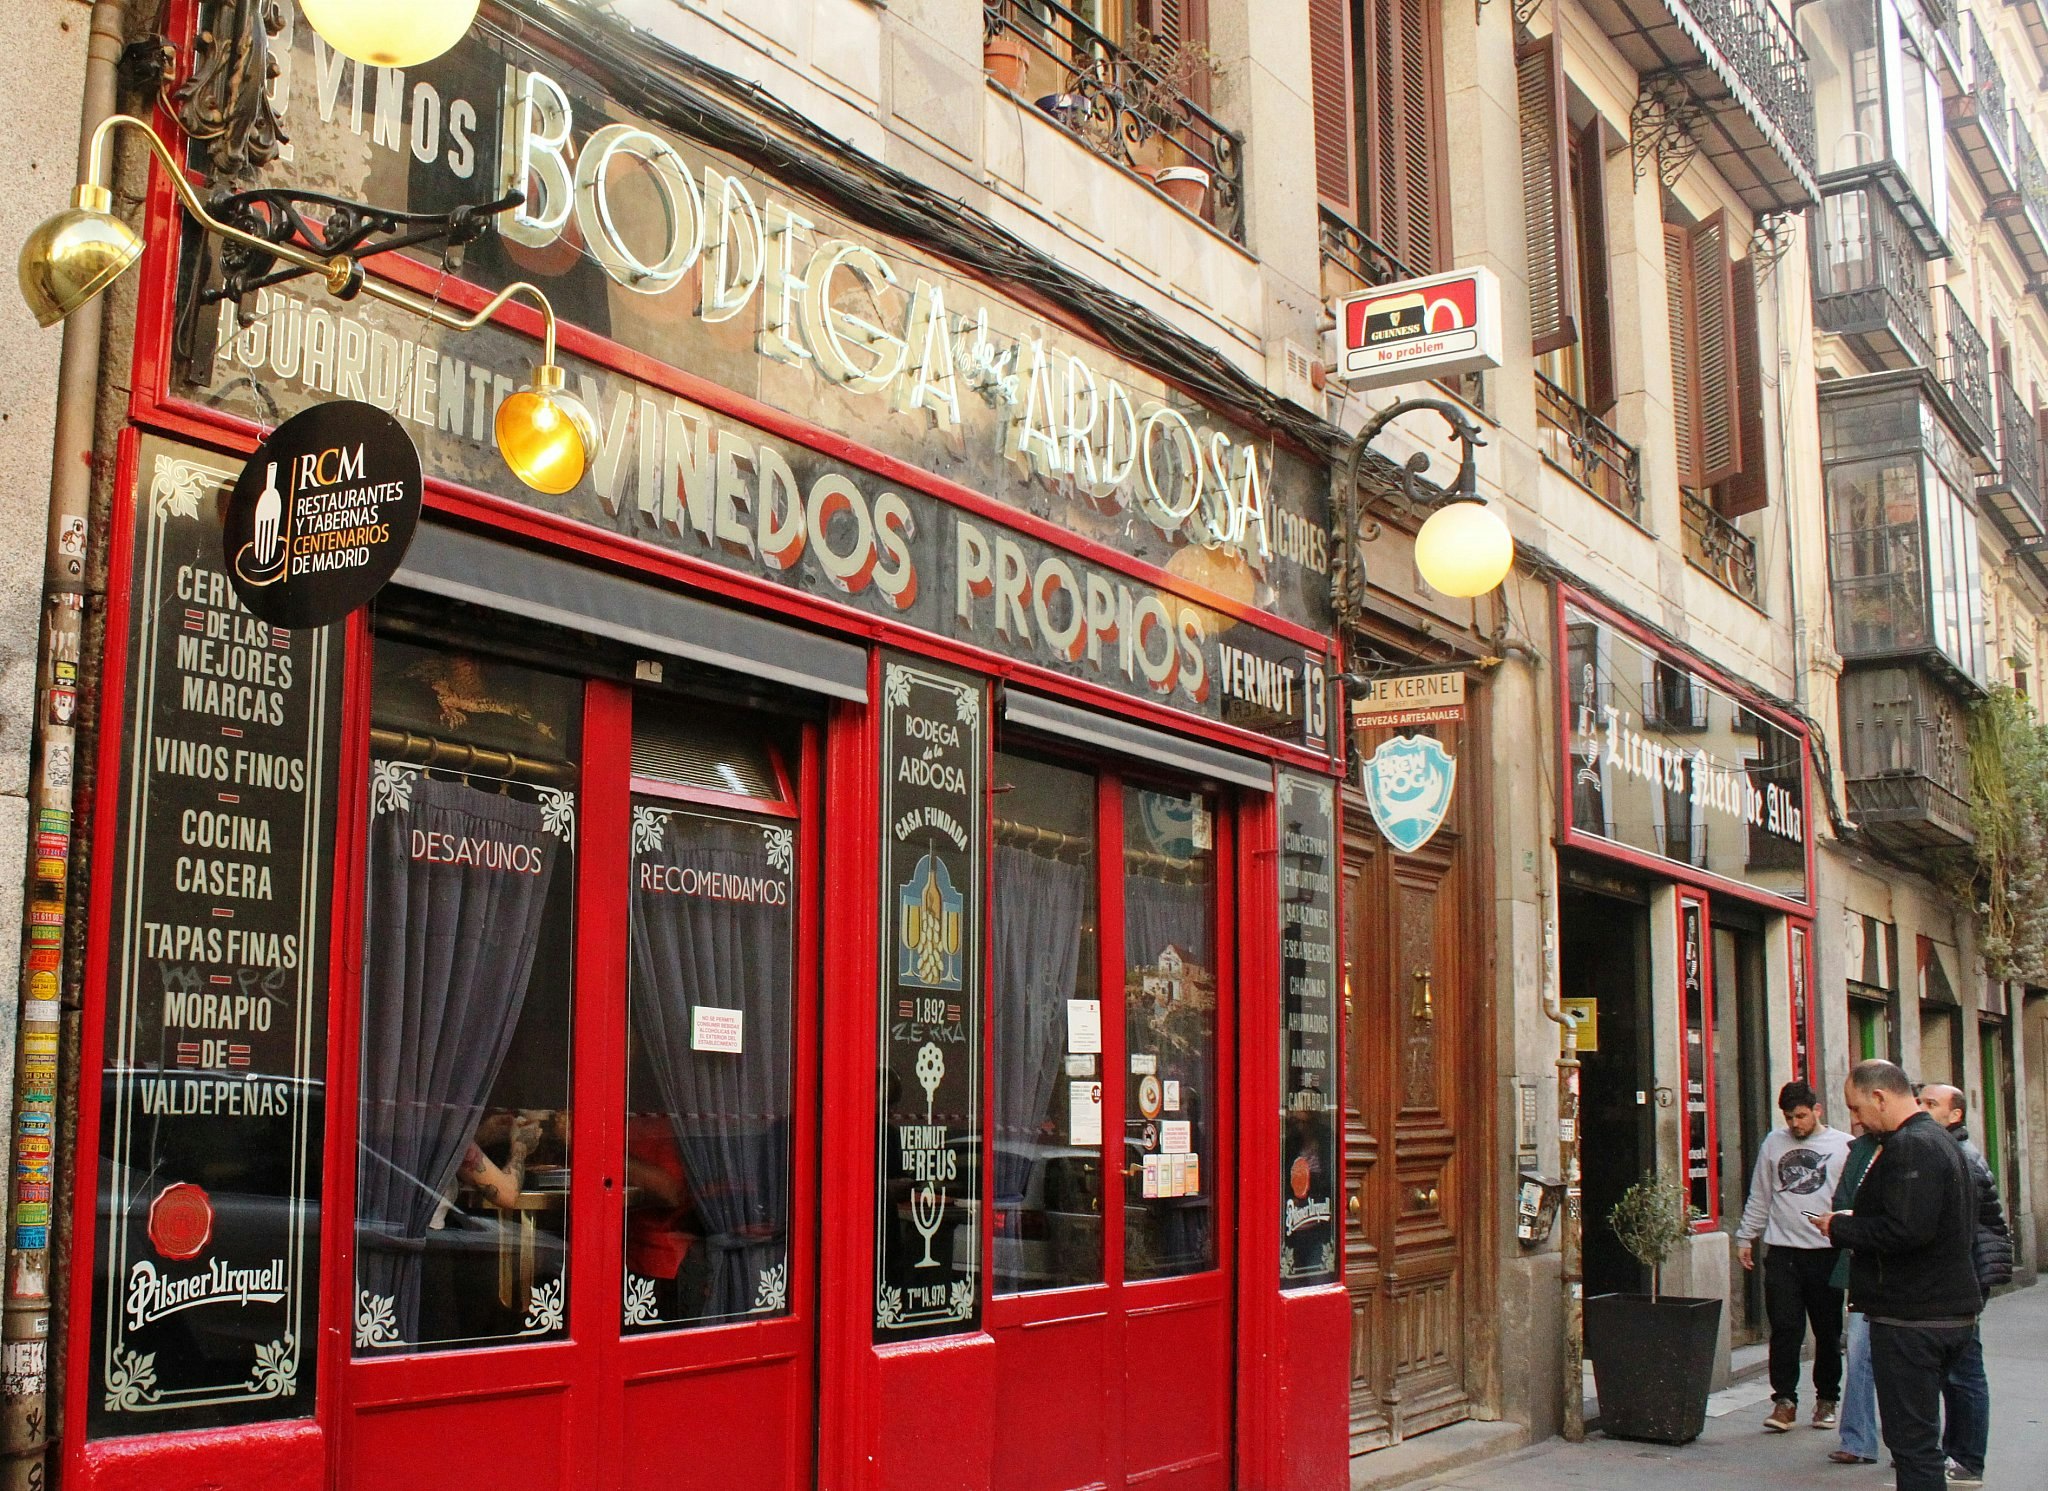 The bright red-painted facade of Bodega Ardosa, with old-fashioned signs announcing the bar's wares and mauve curtains hanging in the windows.